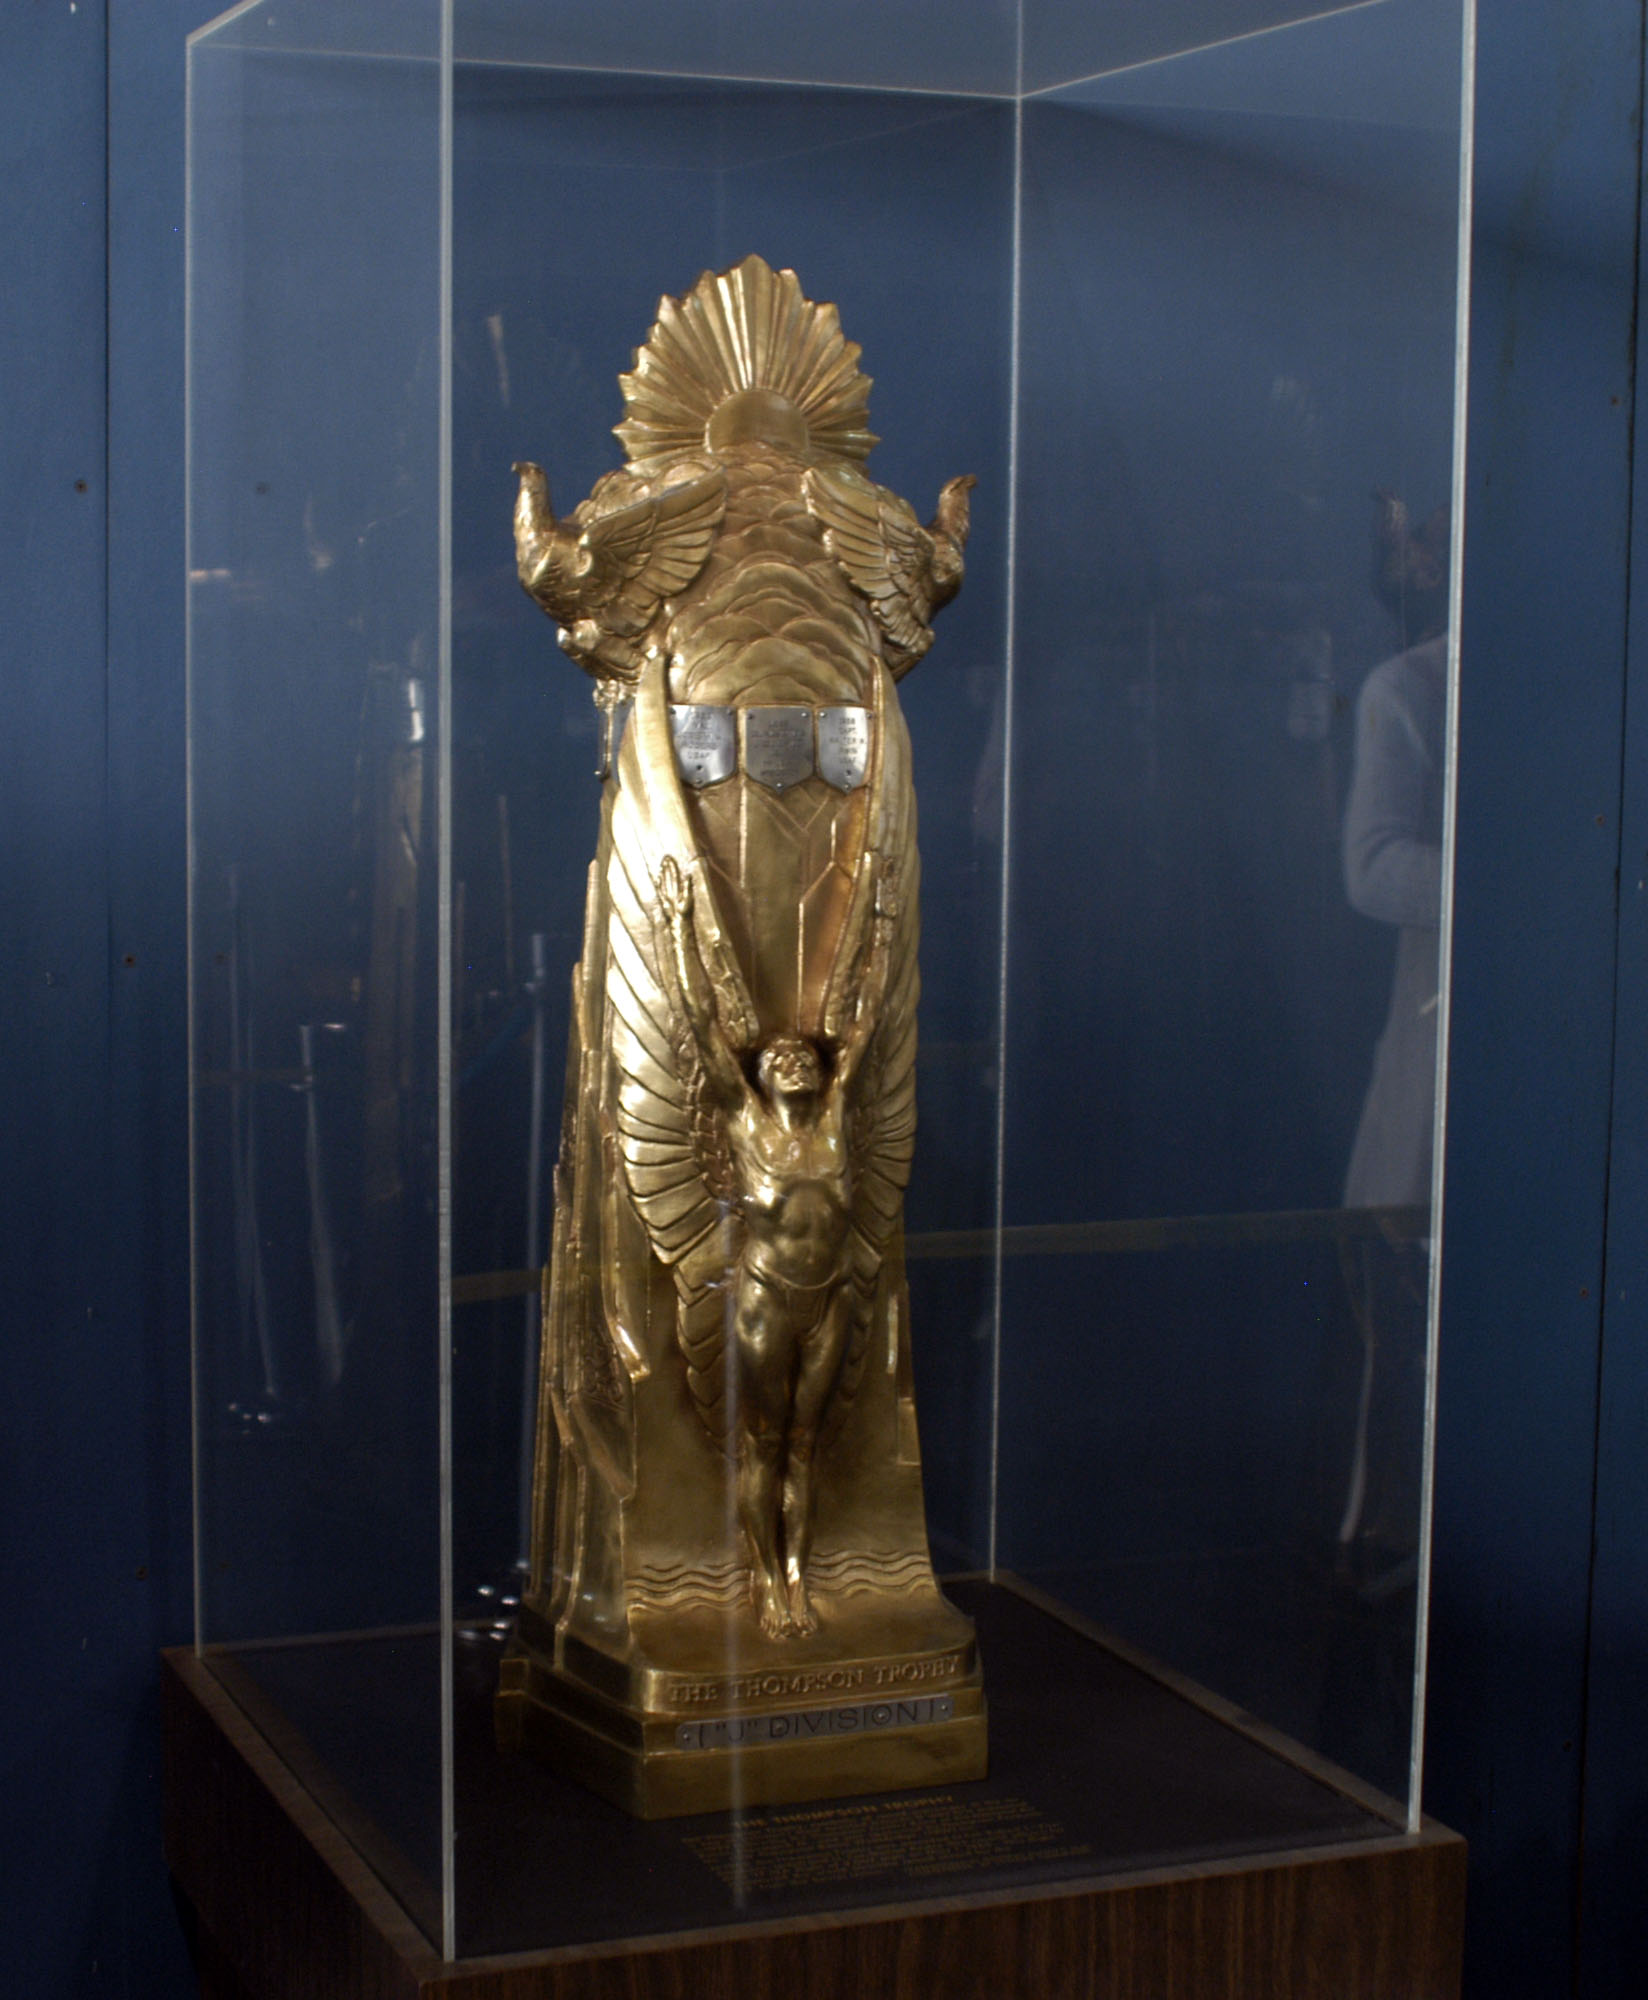 The 1965 Thompson Trophy on display at the National Museum of the United States Air Force. (U.S. Air Force)